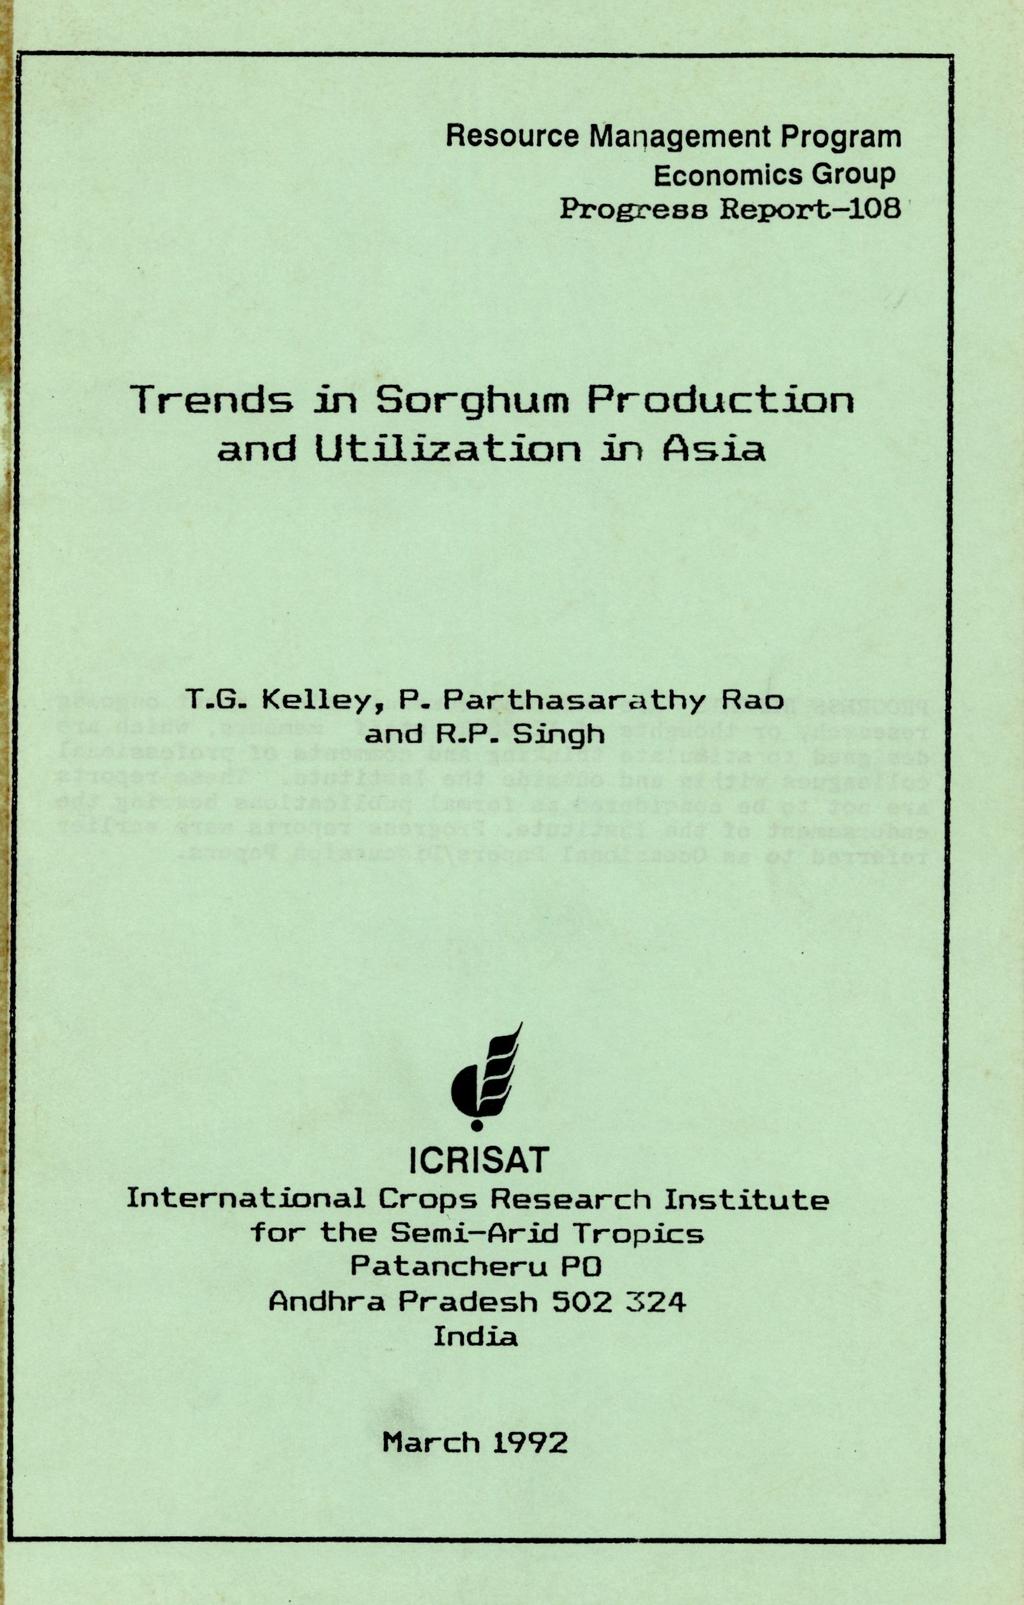 Resource Management Program Economics Group Progress Report-108 Trends in Sorghum Production and Utilization in Asia T.G. Kelley, P.